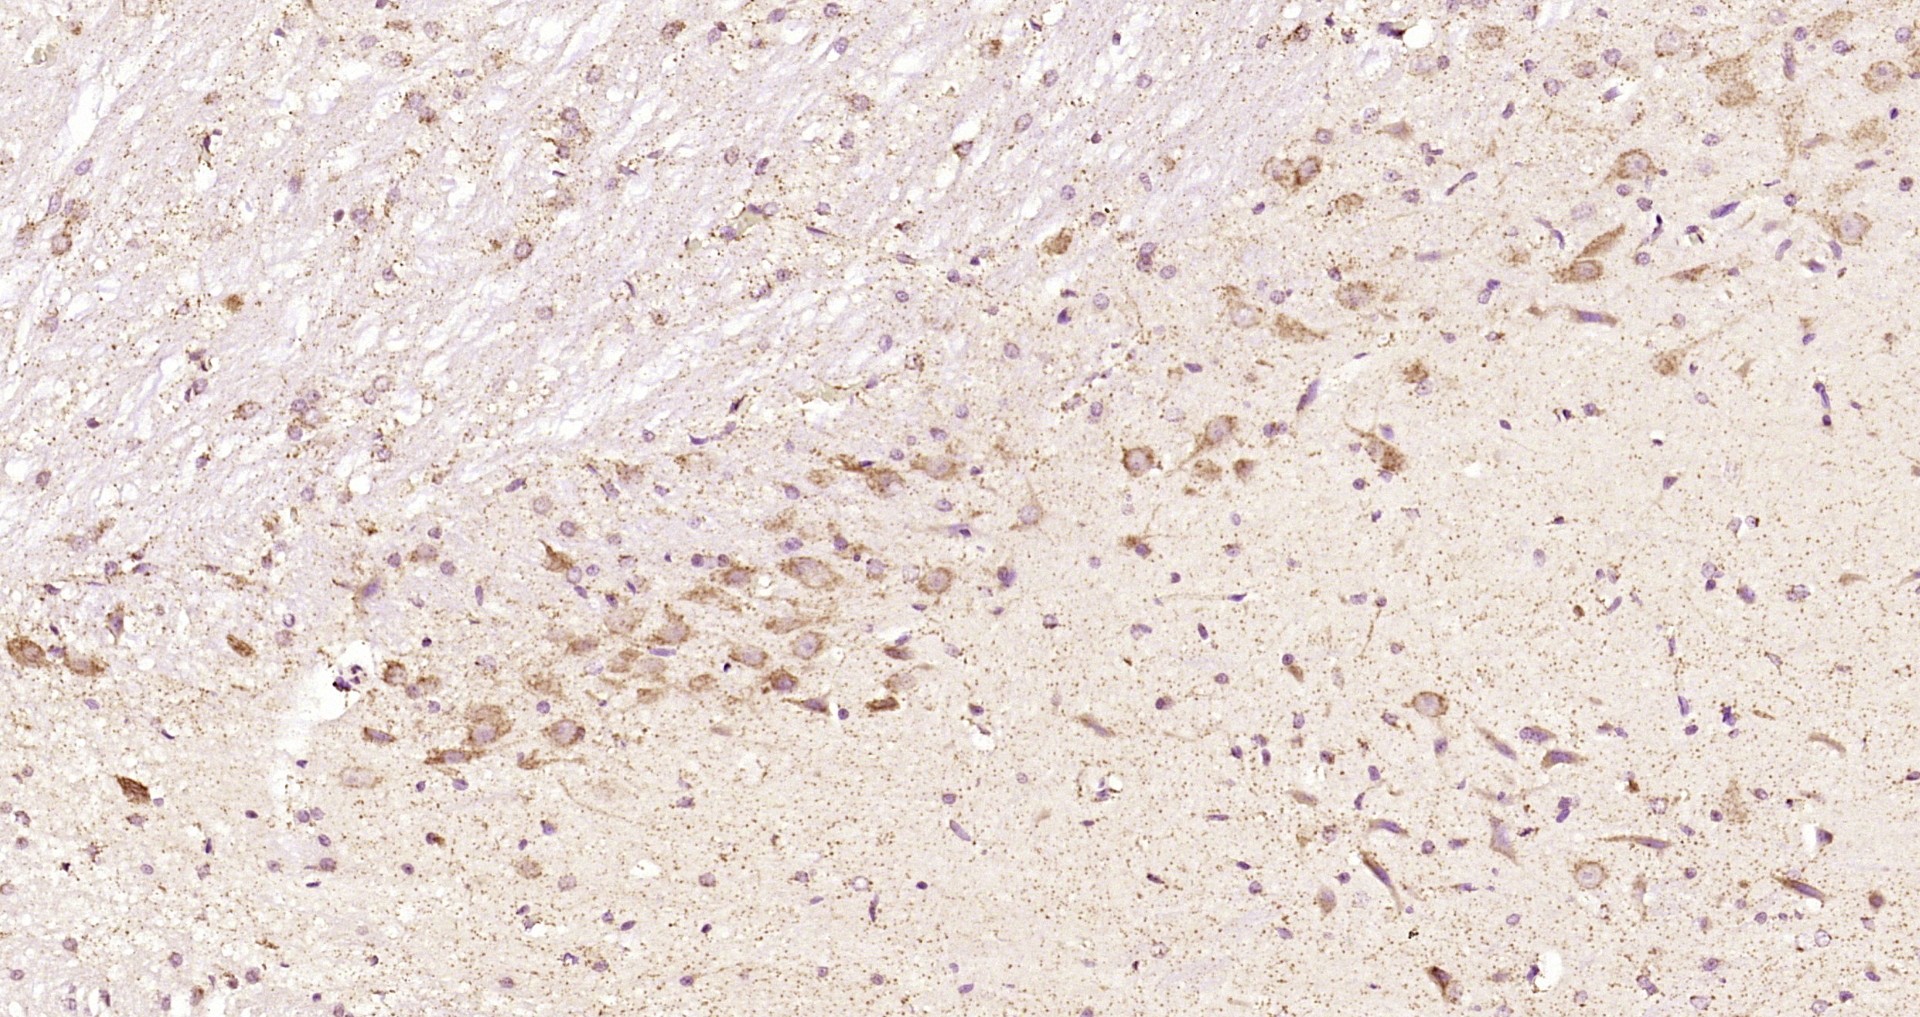 Paraformaldehyde-fixed, paraffin embedded Rat brain; Antigen retrieval by boiling in sodium citrate buffer (pH6.0) for 15min; Block endogenous peroxidase by 3% hydrogen peroxide for 20 minutes; Blocking buffer (normal goat serum) at 37°C for 30min; Antibody incubation with ELP4 Polyclonal Antibody, Unconjugated (bs-14574R) at 1:200 overnight at 4°C, DAB staining.